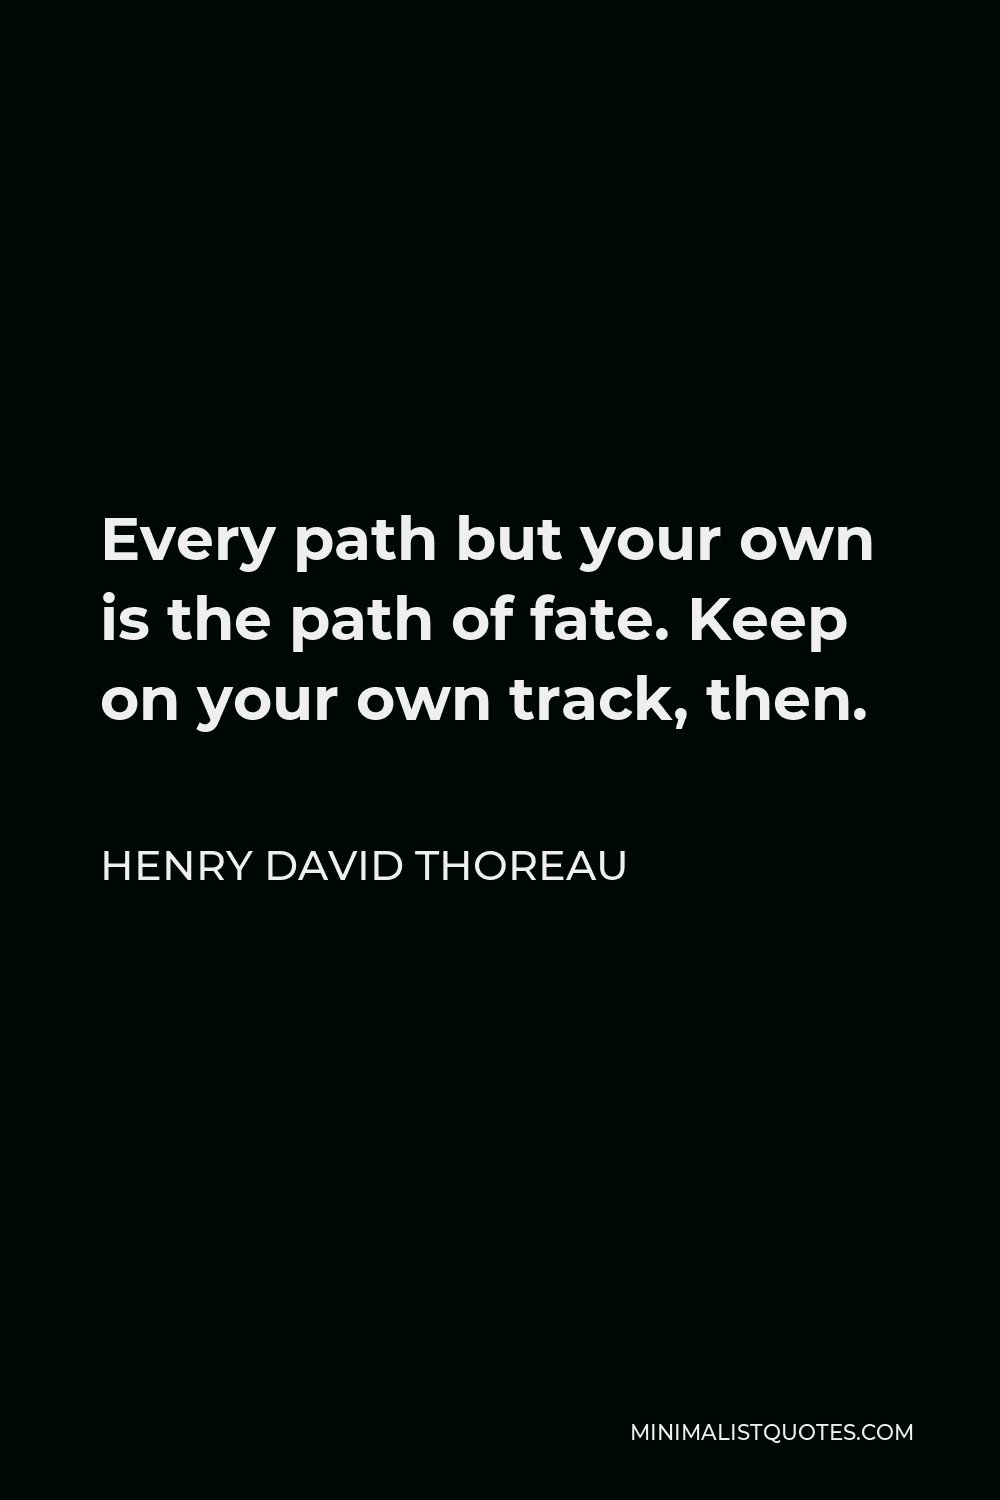 Henry David Thoreau Quote - Every path but your own is the path of fate. Keep on your own track, then.